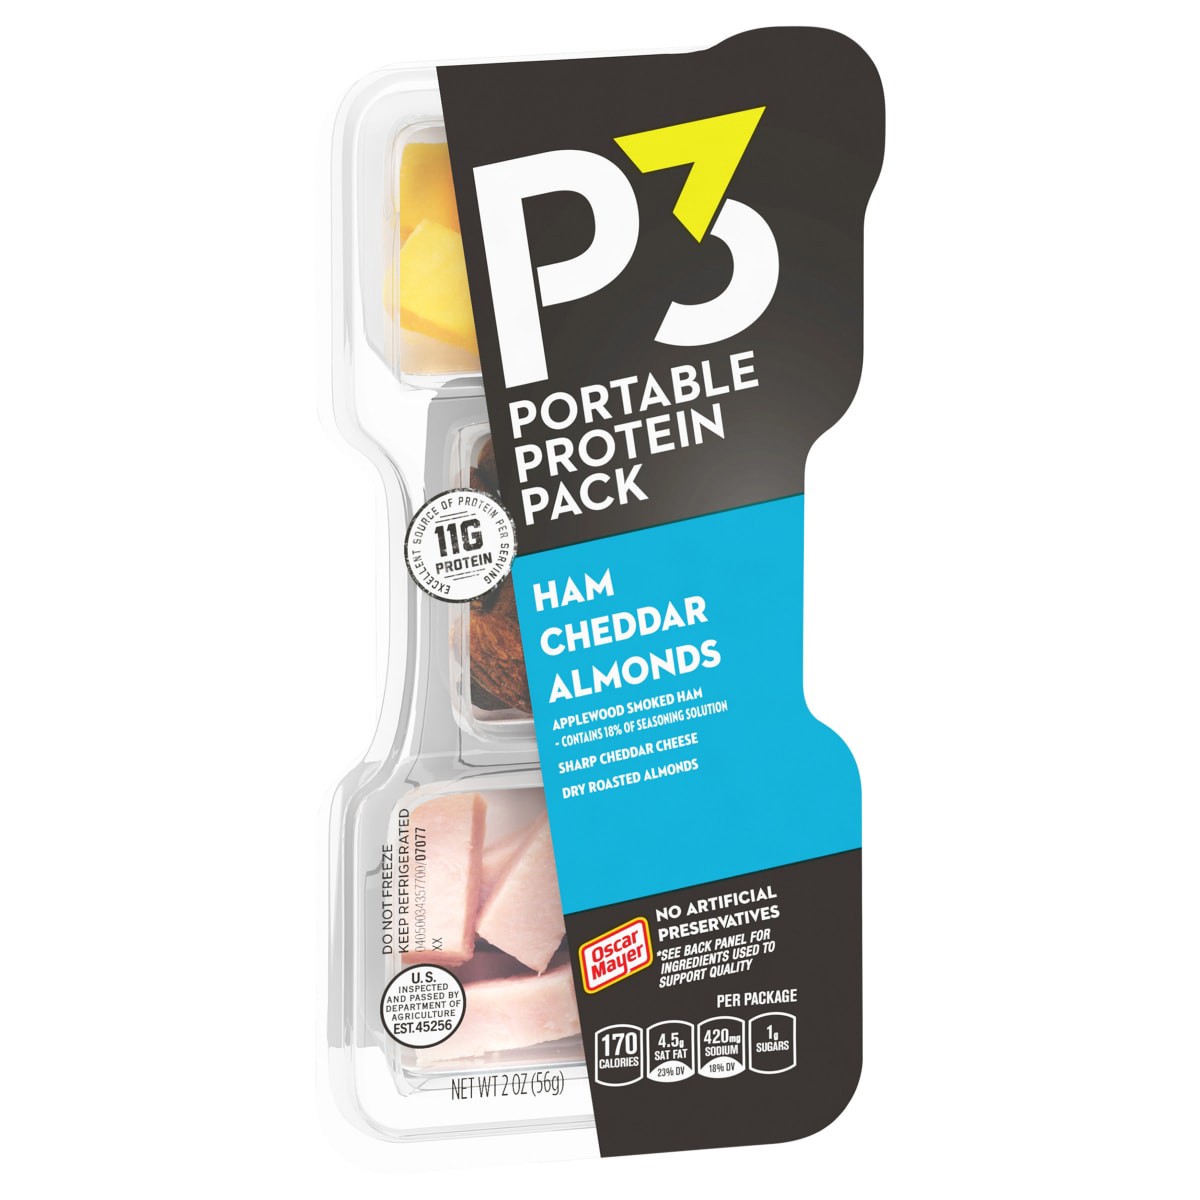 slide 9 of 29, Oscar Mayer P3 Portable Protein Snack Pack with Ham, Almonds & Cheddar Cheese, for School Lunch or Easy Snack Tray, 2 oz